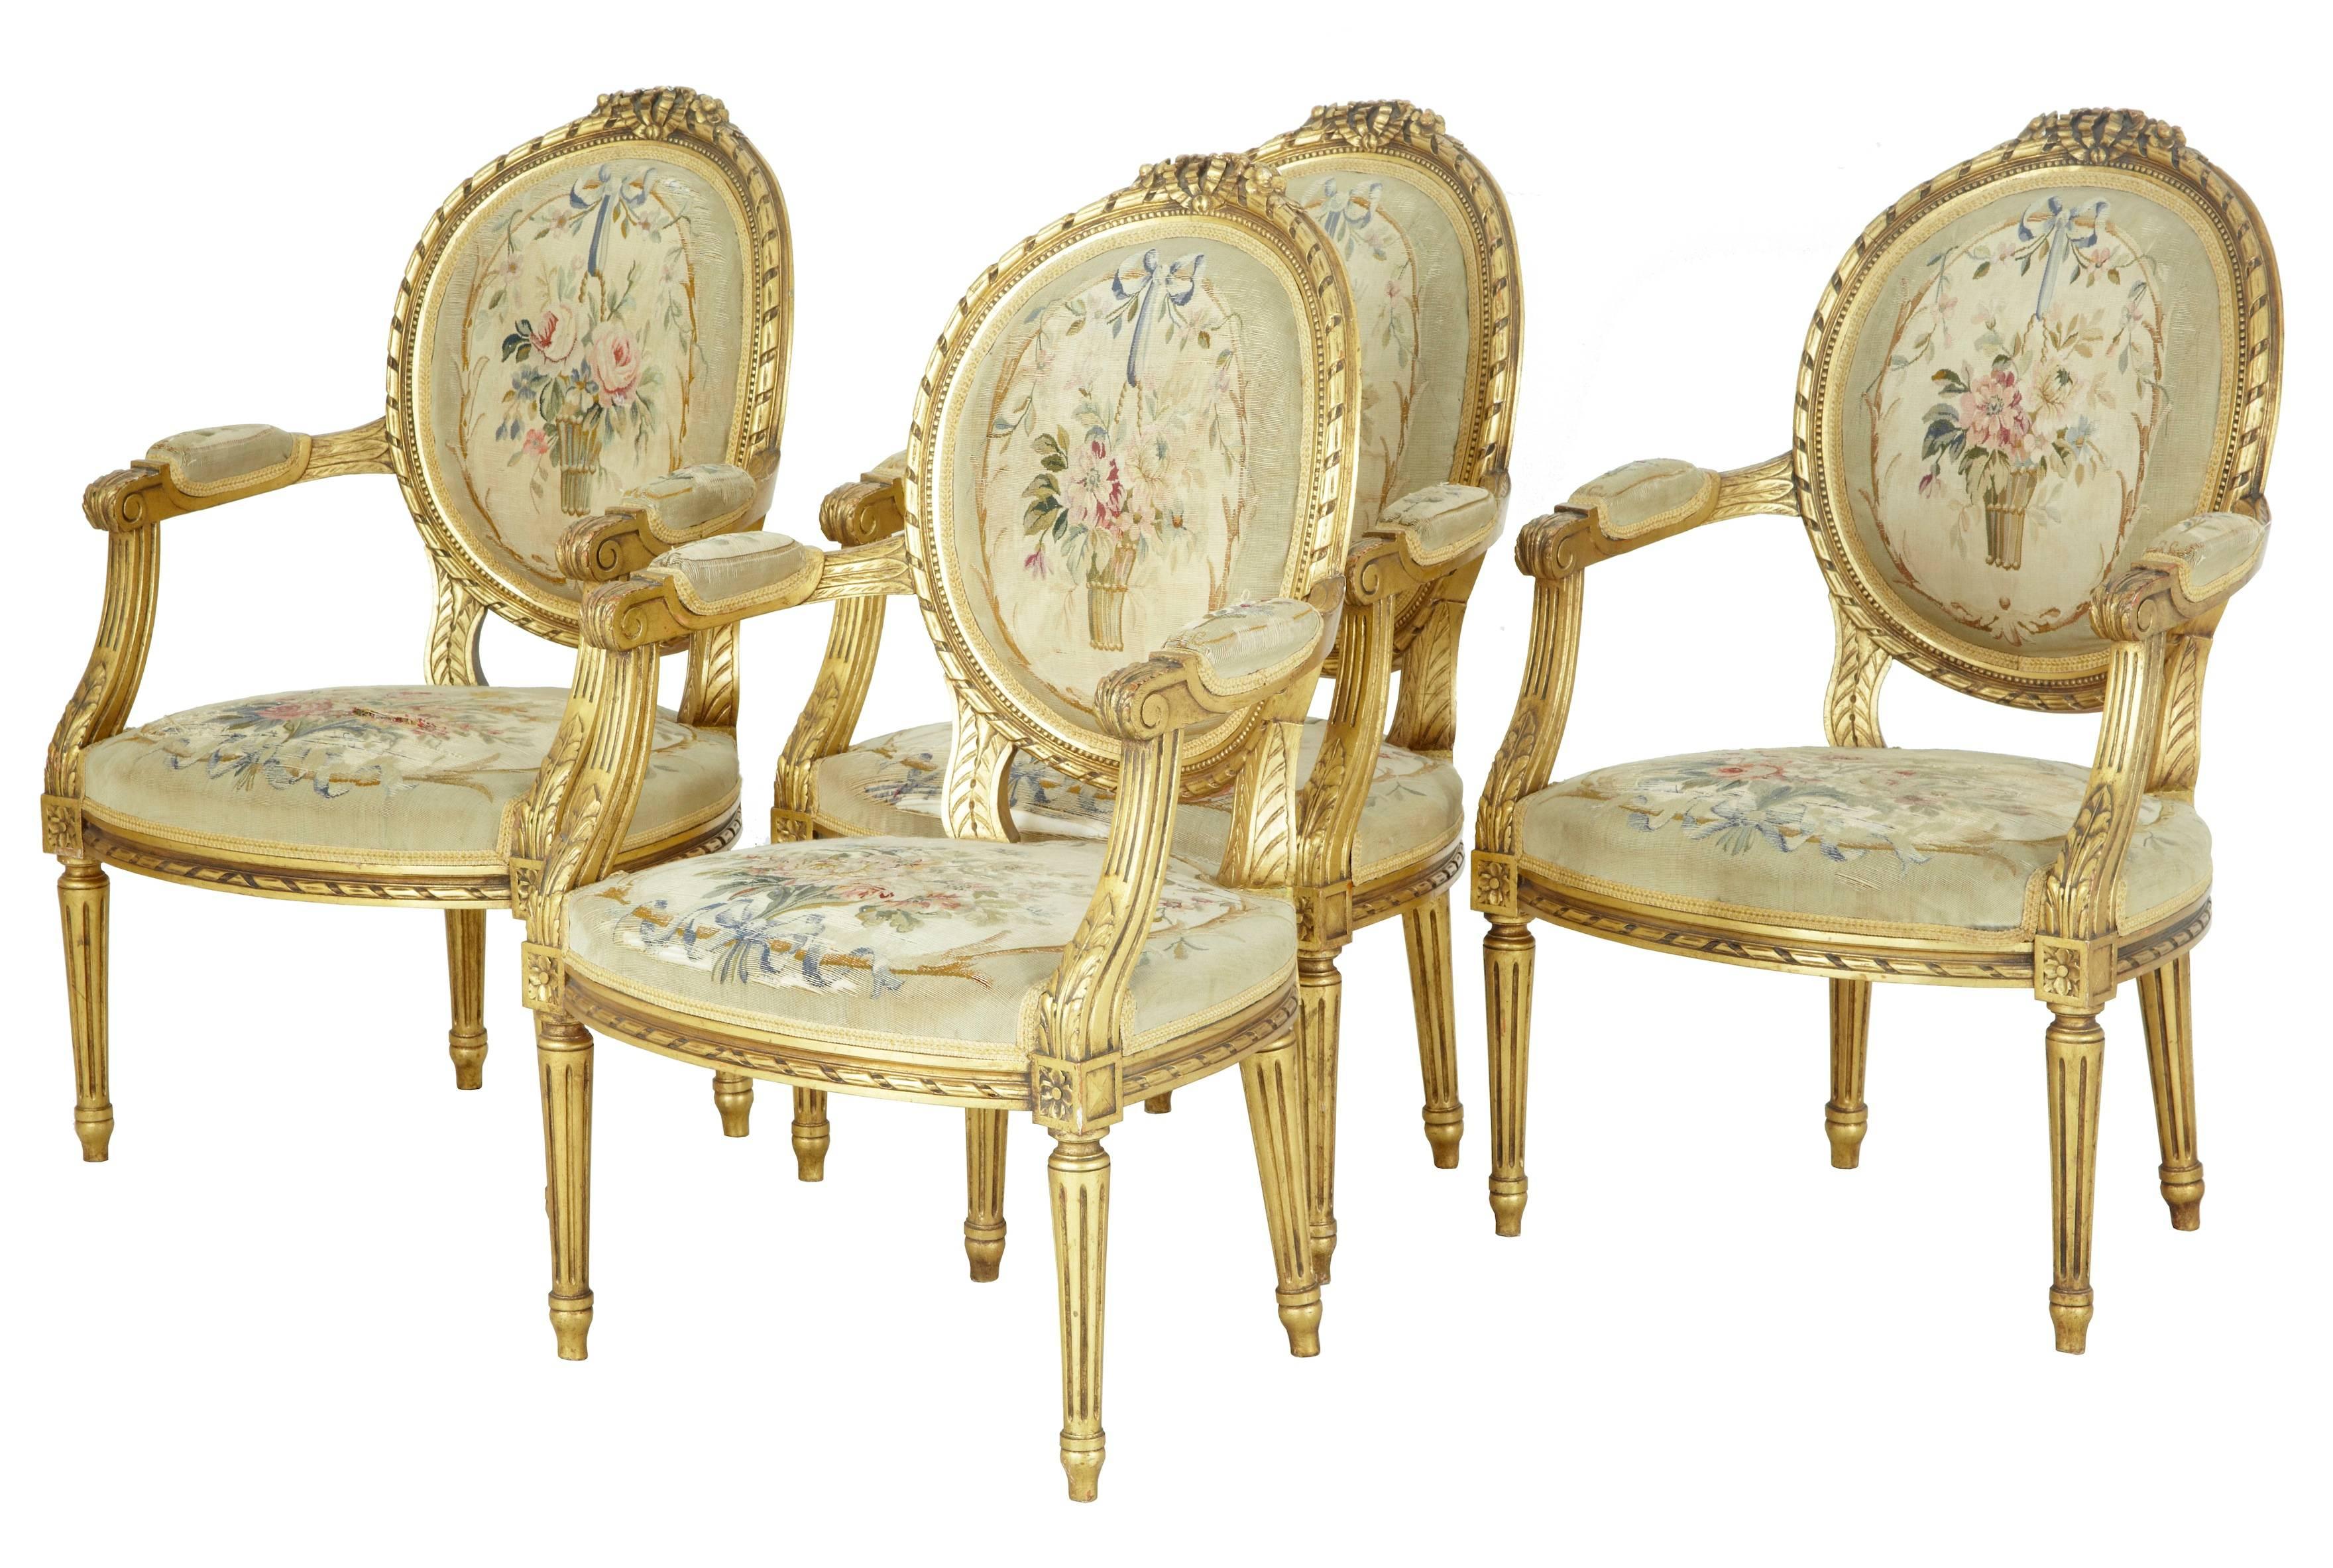 Good quality five-piece salon suite, circa 1880.
Set comprises of two-seat sofa and four armchairs.
Beautifully carved back rests, acanthus leaf detailed scrolled arms, which is repeated down to the legs.
Original floral tapestry covering which